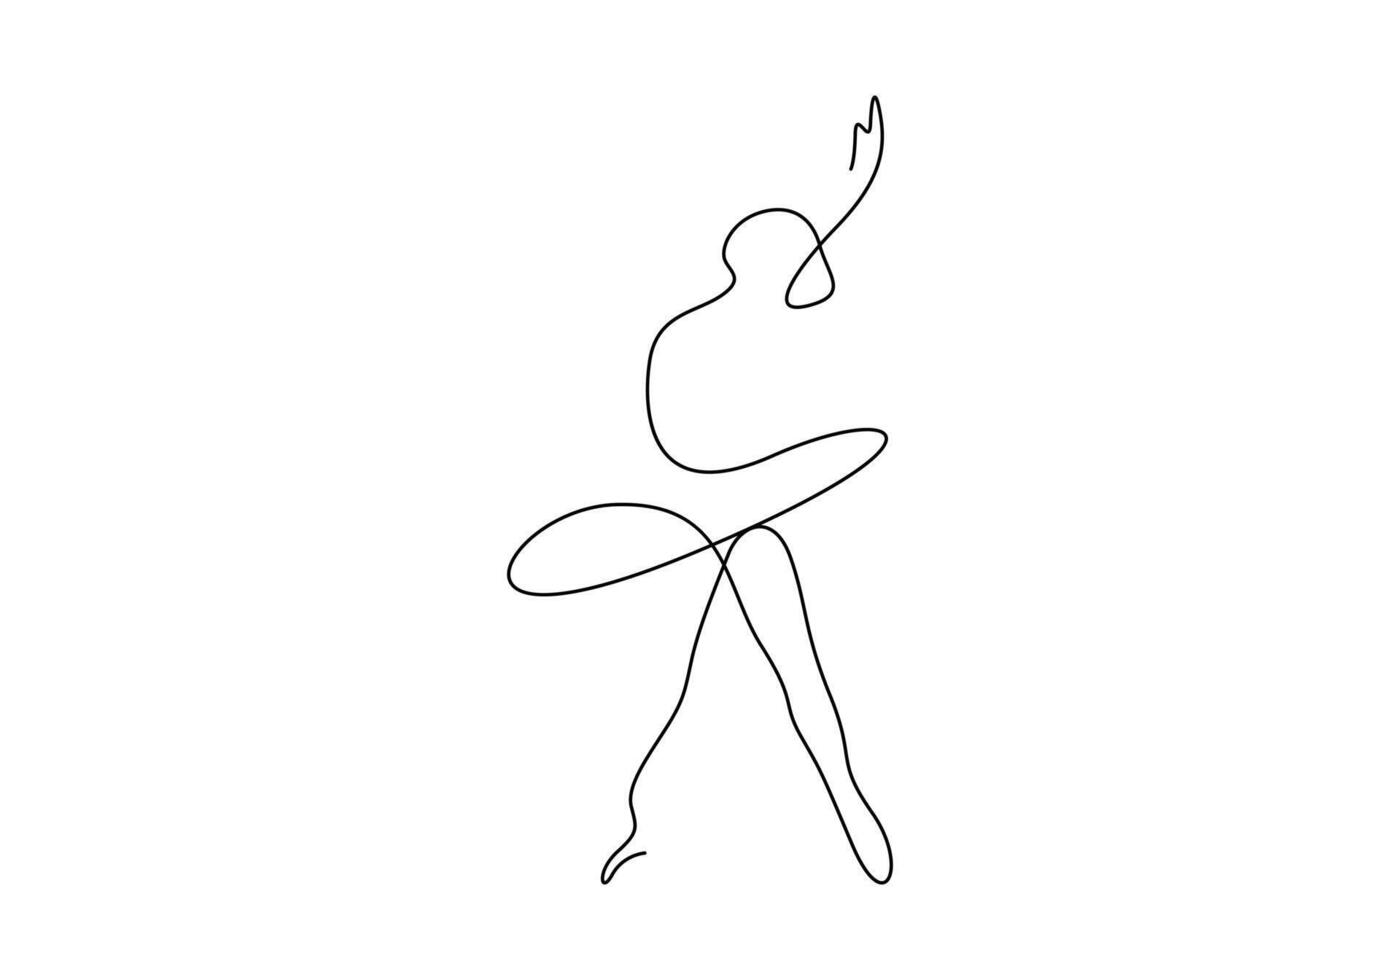 Continuous one line drawing of woman beauty ballet dancer in elegance motion premium illustration vector